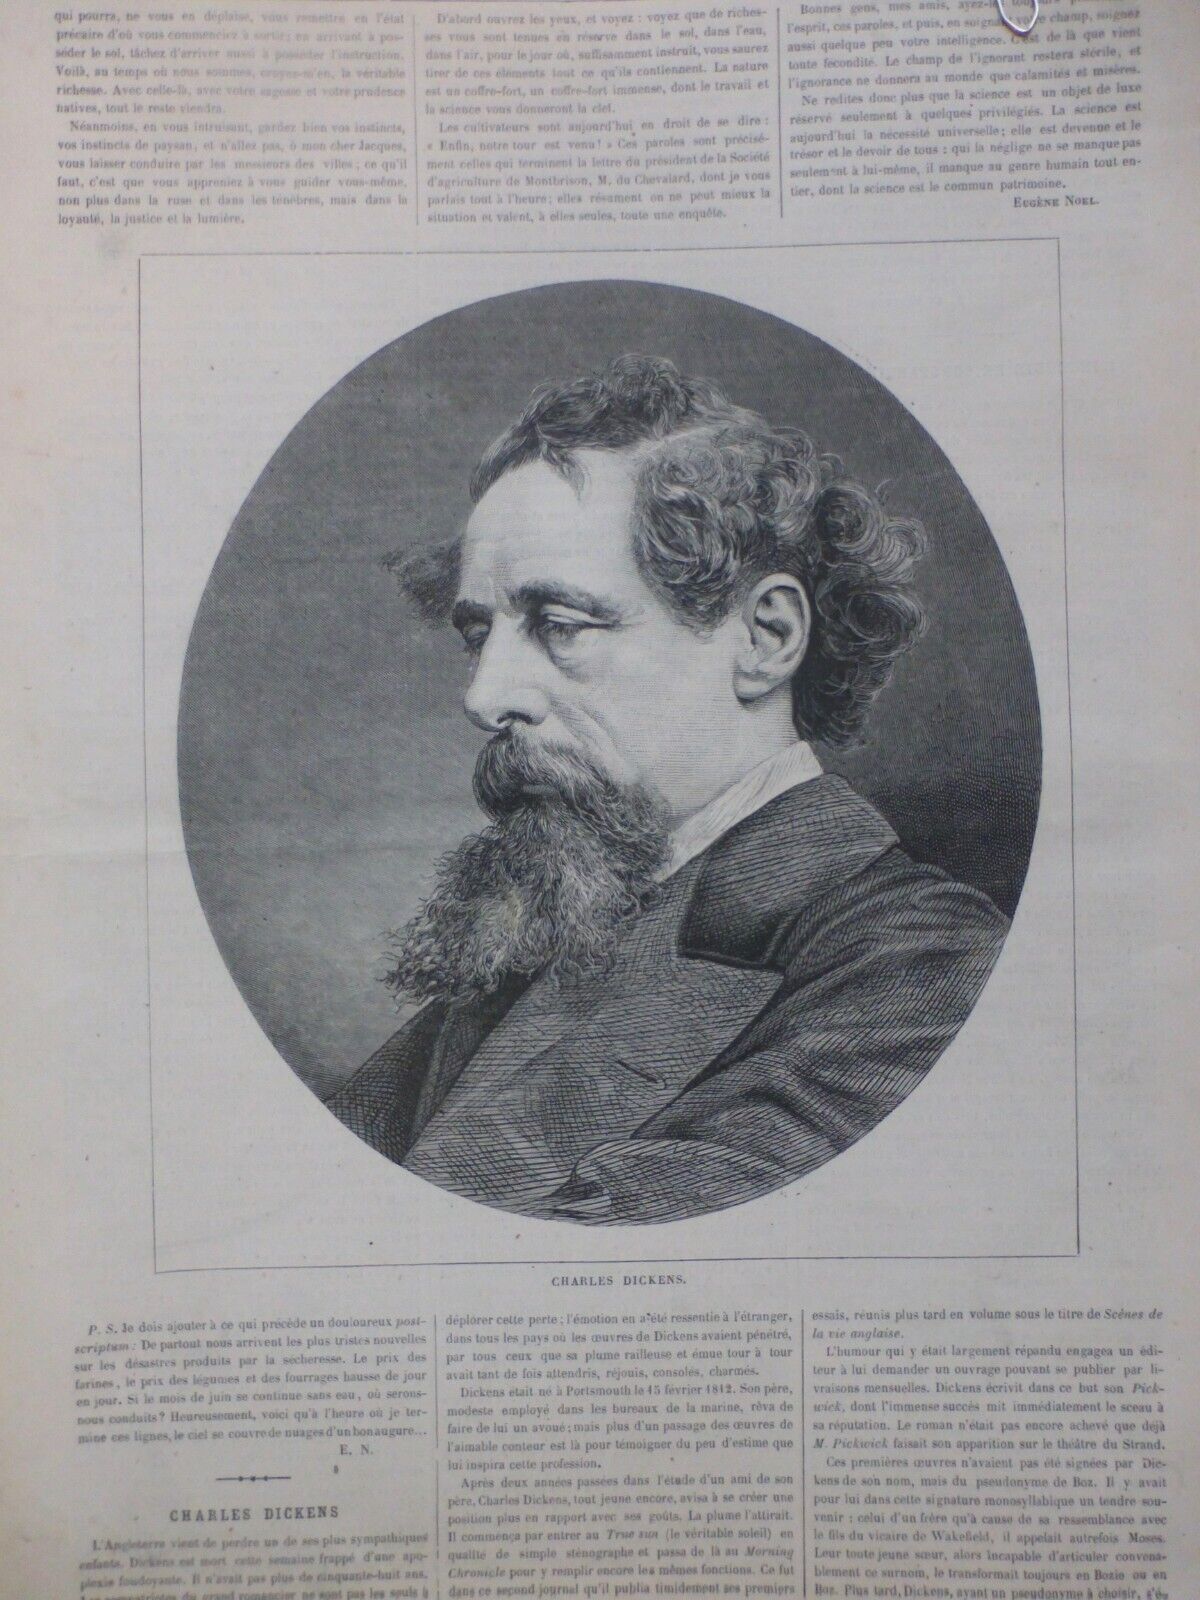 1860 1870 Celebrity Man Charles Dickens Novelist L\' Abyss 4 Newspapers Antique